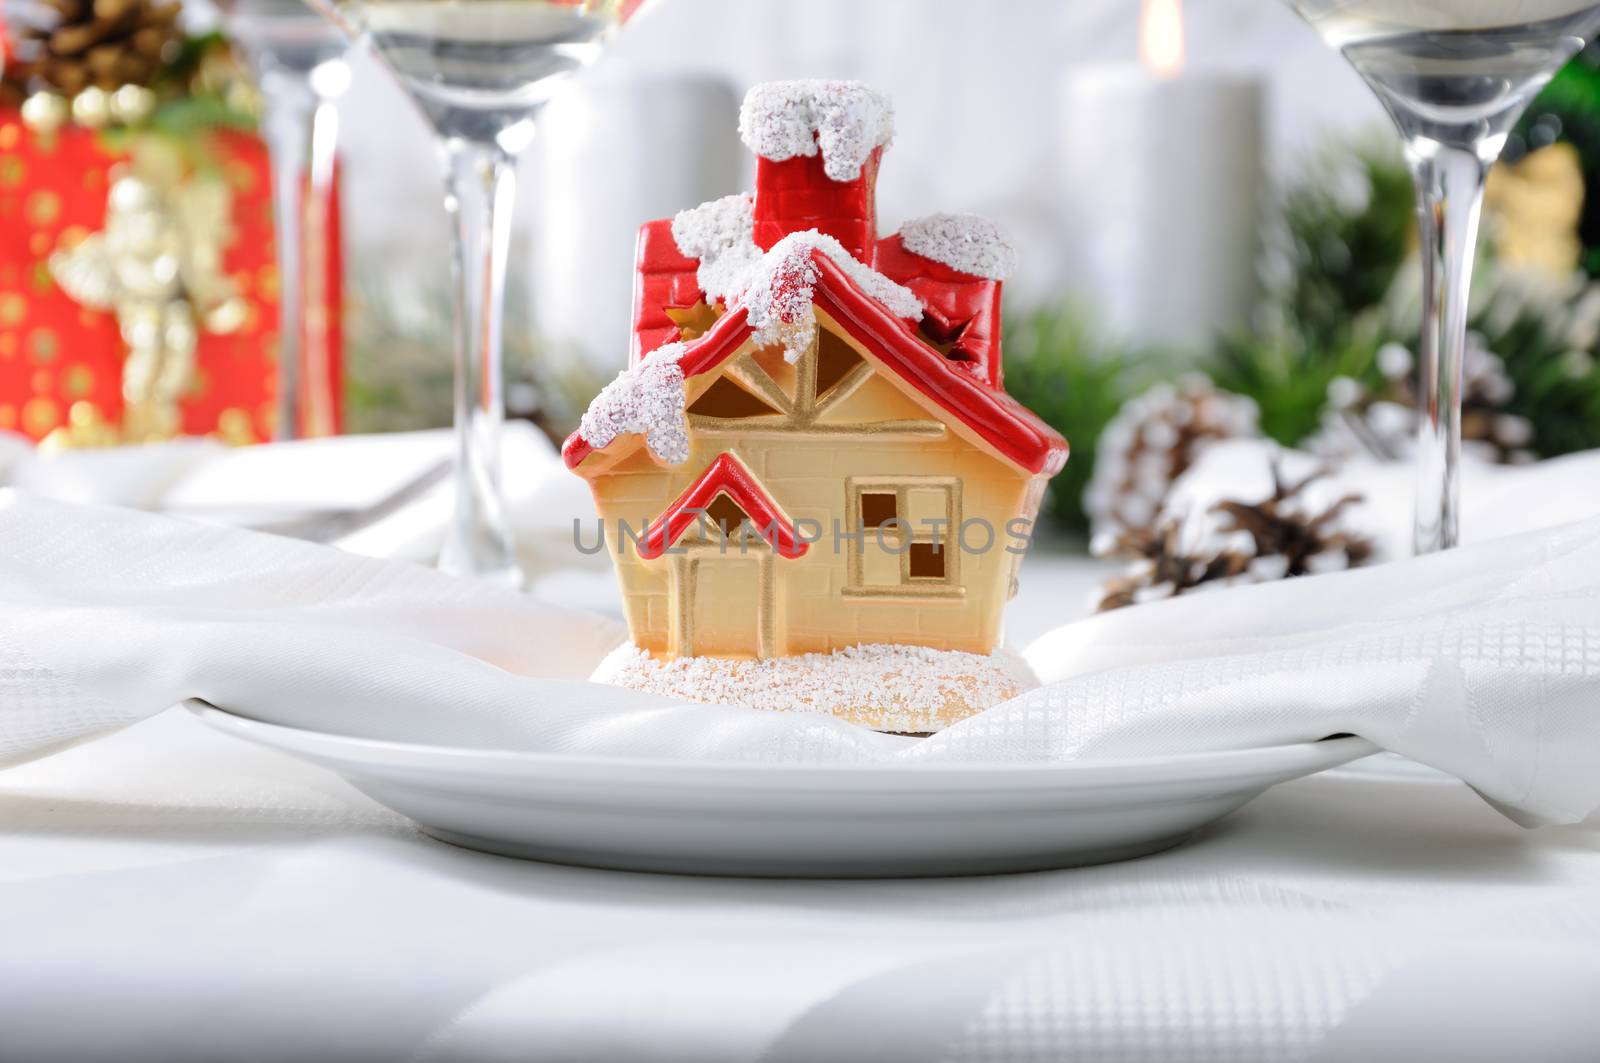 Souvenir in the form of a Christmas house on the Christmas table